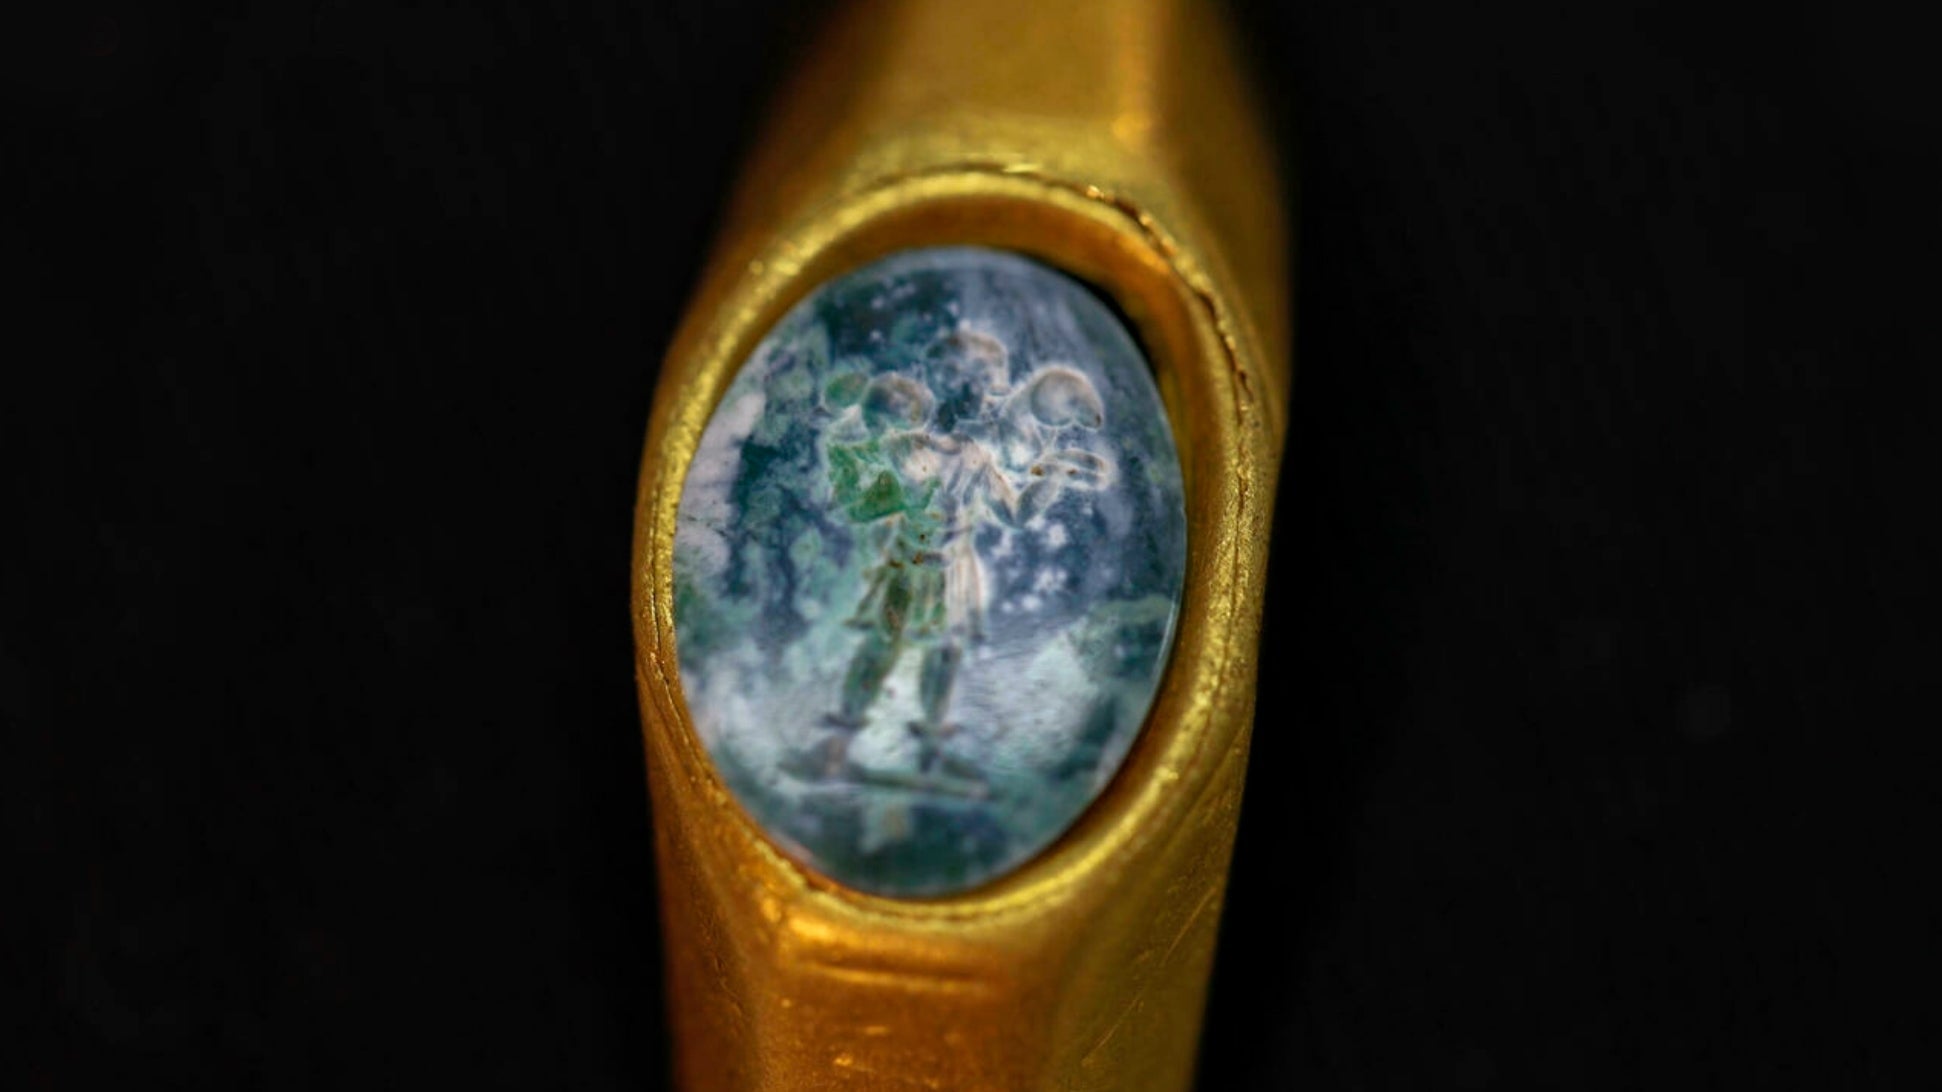 Ancient Gold Ring With The Symbol Of The "Good Shepherd" Discovered - DSF Antique Jewelry